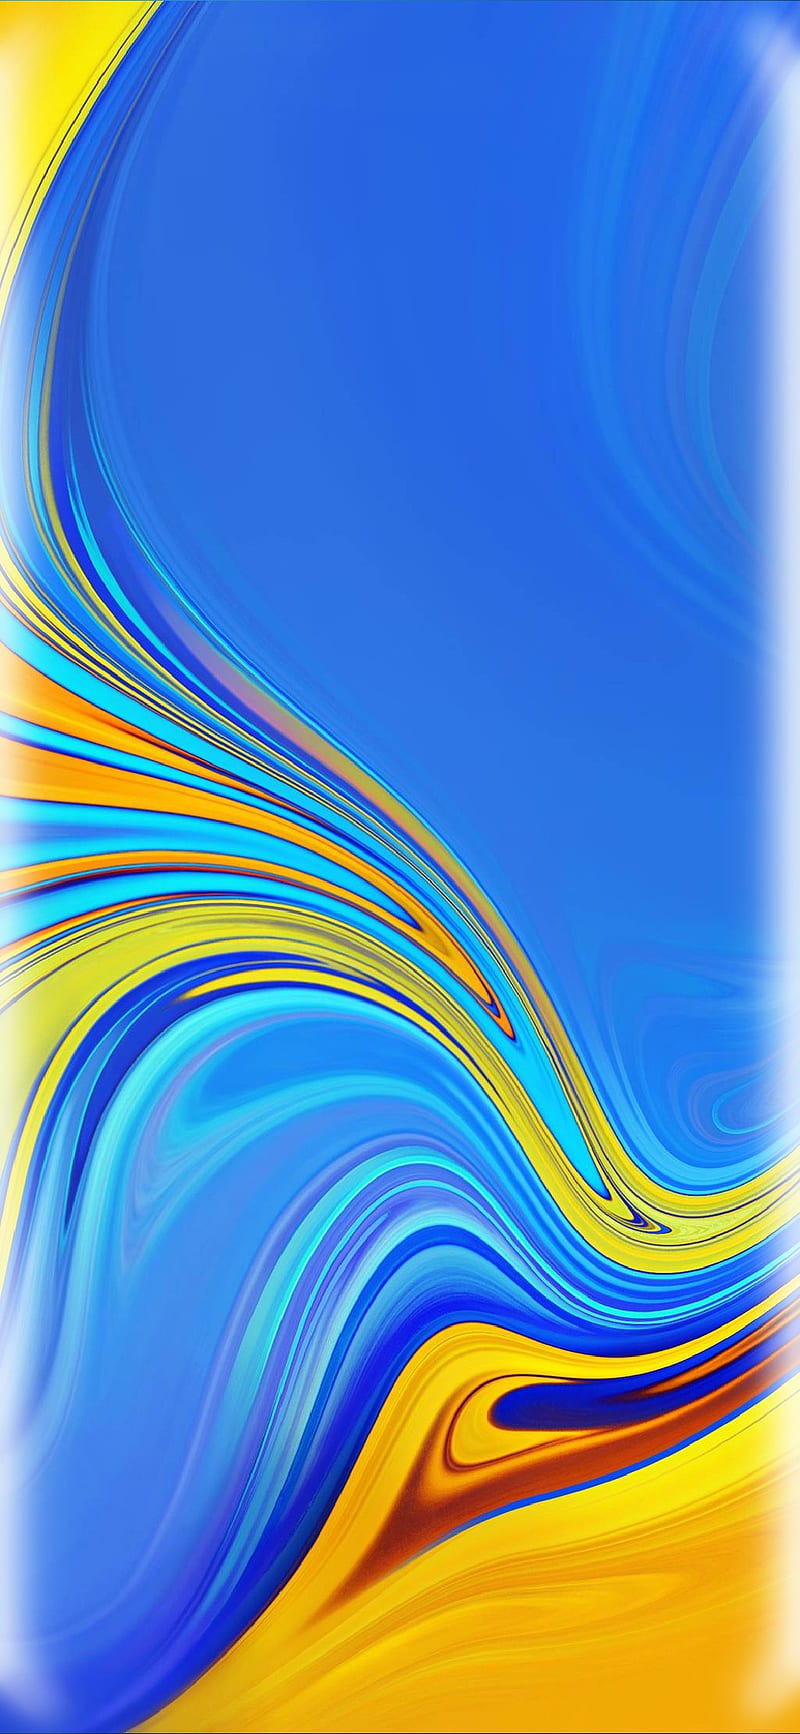 Galaxy A9, samsung, galaxy, edge, curved, note, abstract, melted, yellow, colors, android, HD phone wallpaper